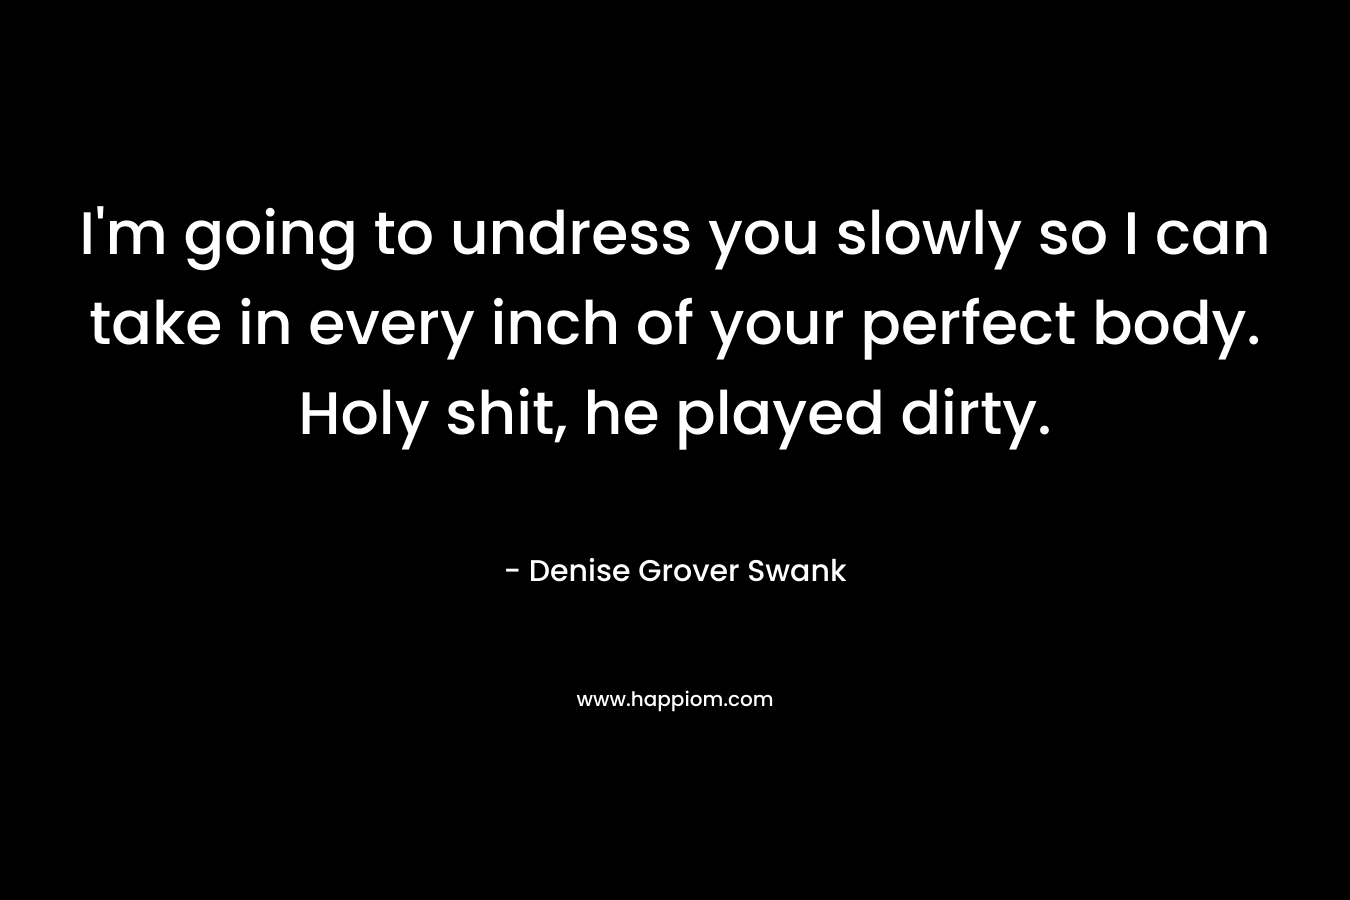 I'm going to undress you slowly so I can take in every inch of your perfect body. Holy shit, he played dirty.